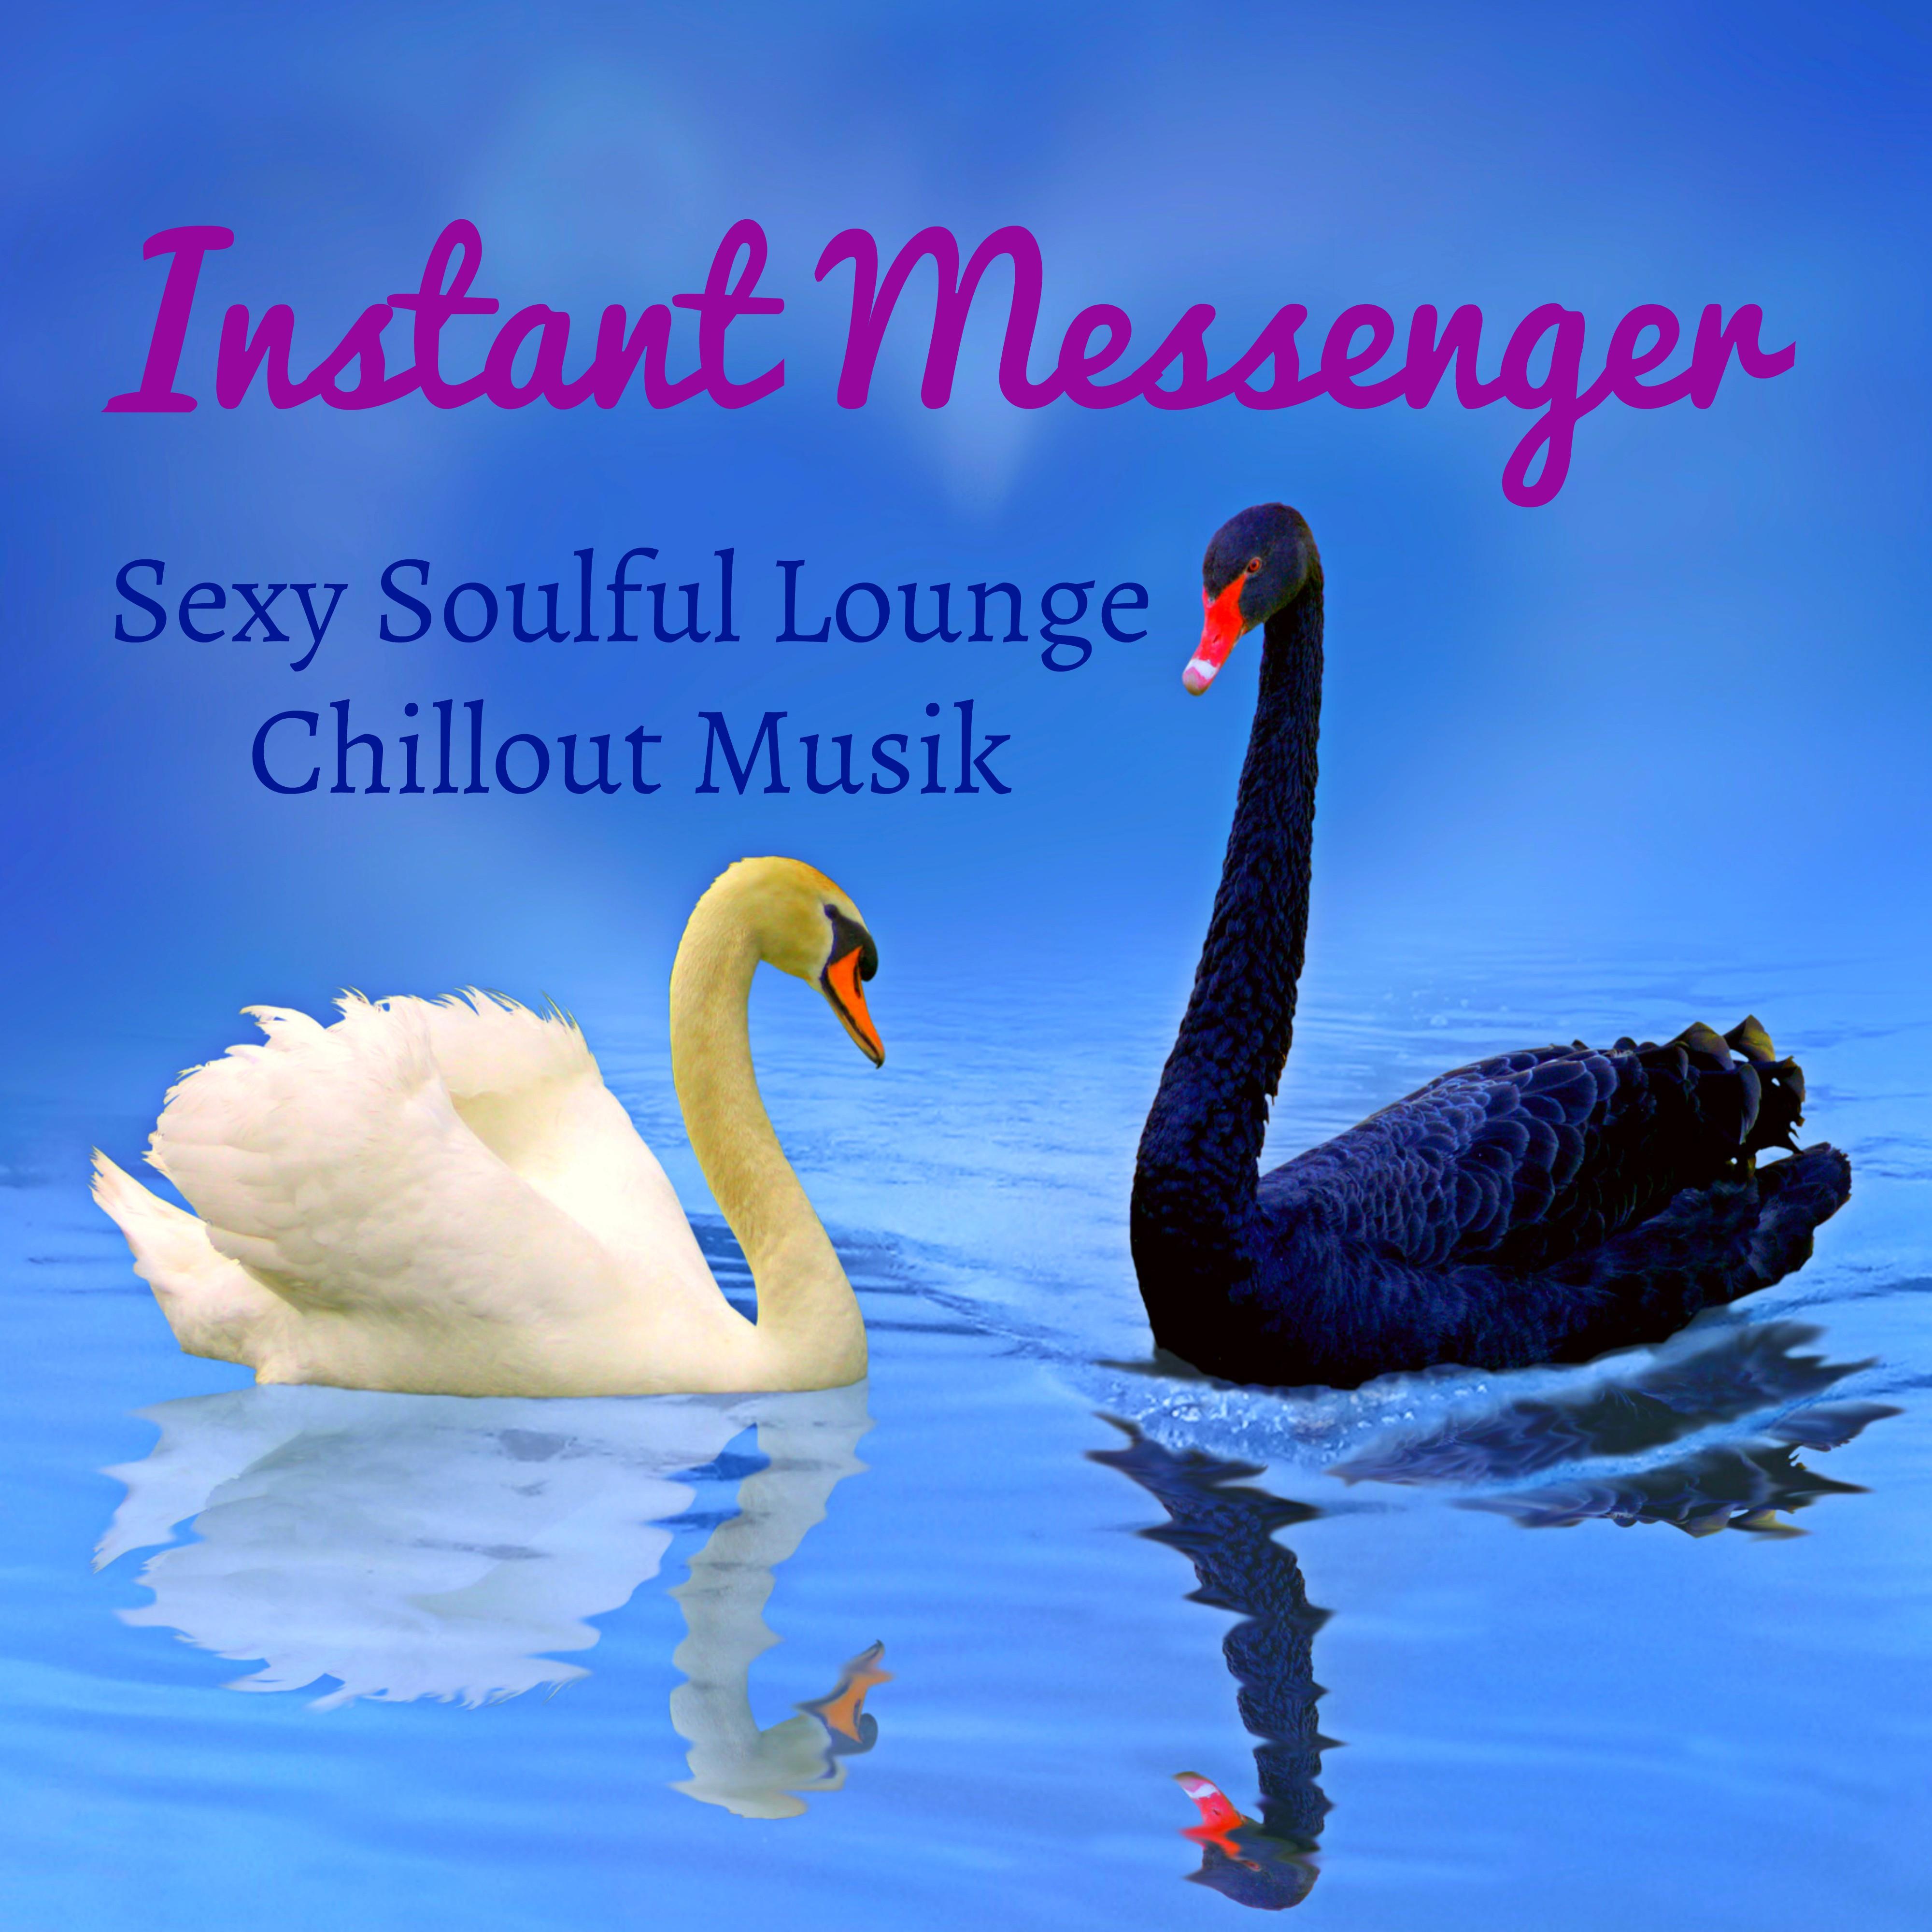 Instant Messenger  Sexy Soulful Lounge Chillout Musik fü r Sü e Nacht und Leicht Fitness